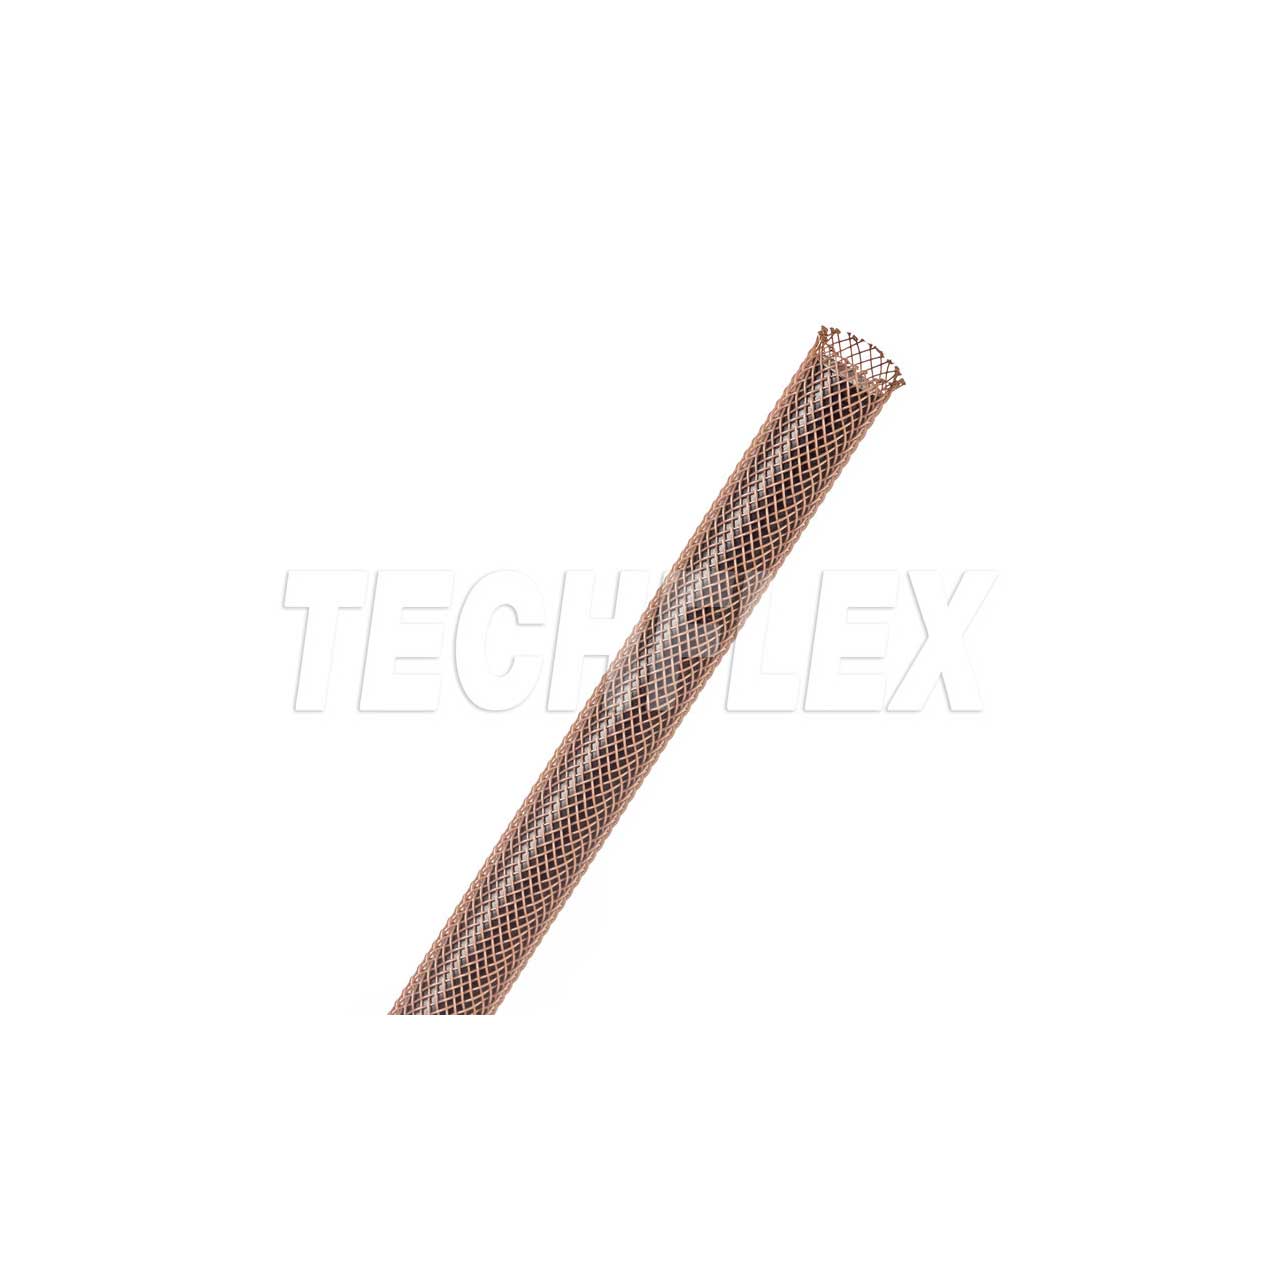 Techflex PTN0.25 1/8 Inch / 7/16 Inch Expandable Tubing - 1000 Foot Roll - Brown PTN0.25BR 1000FT